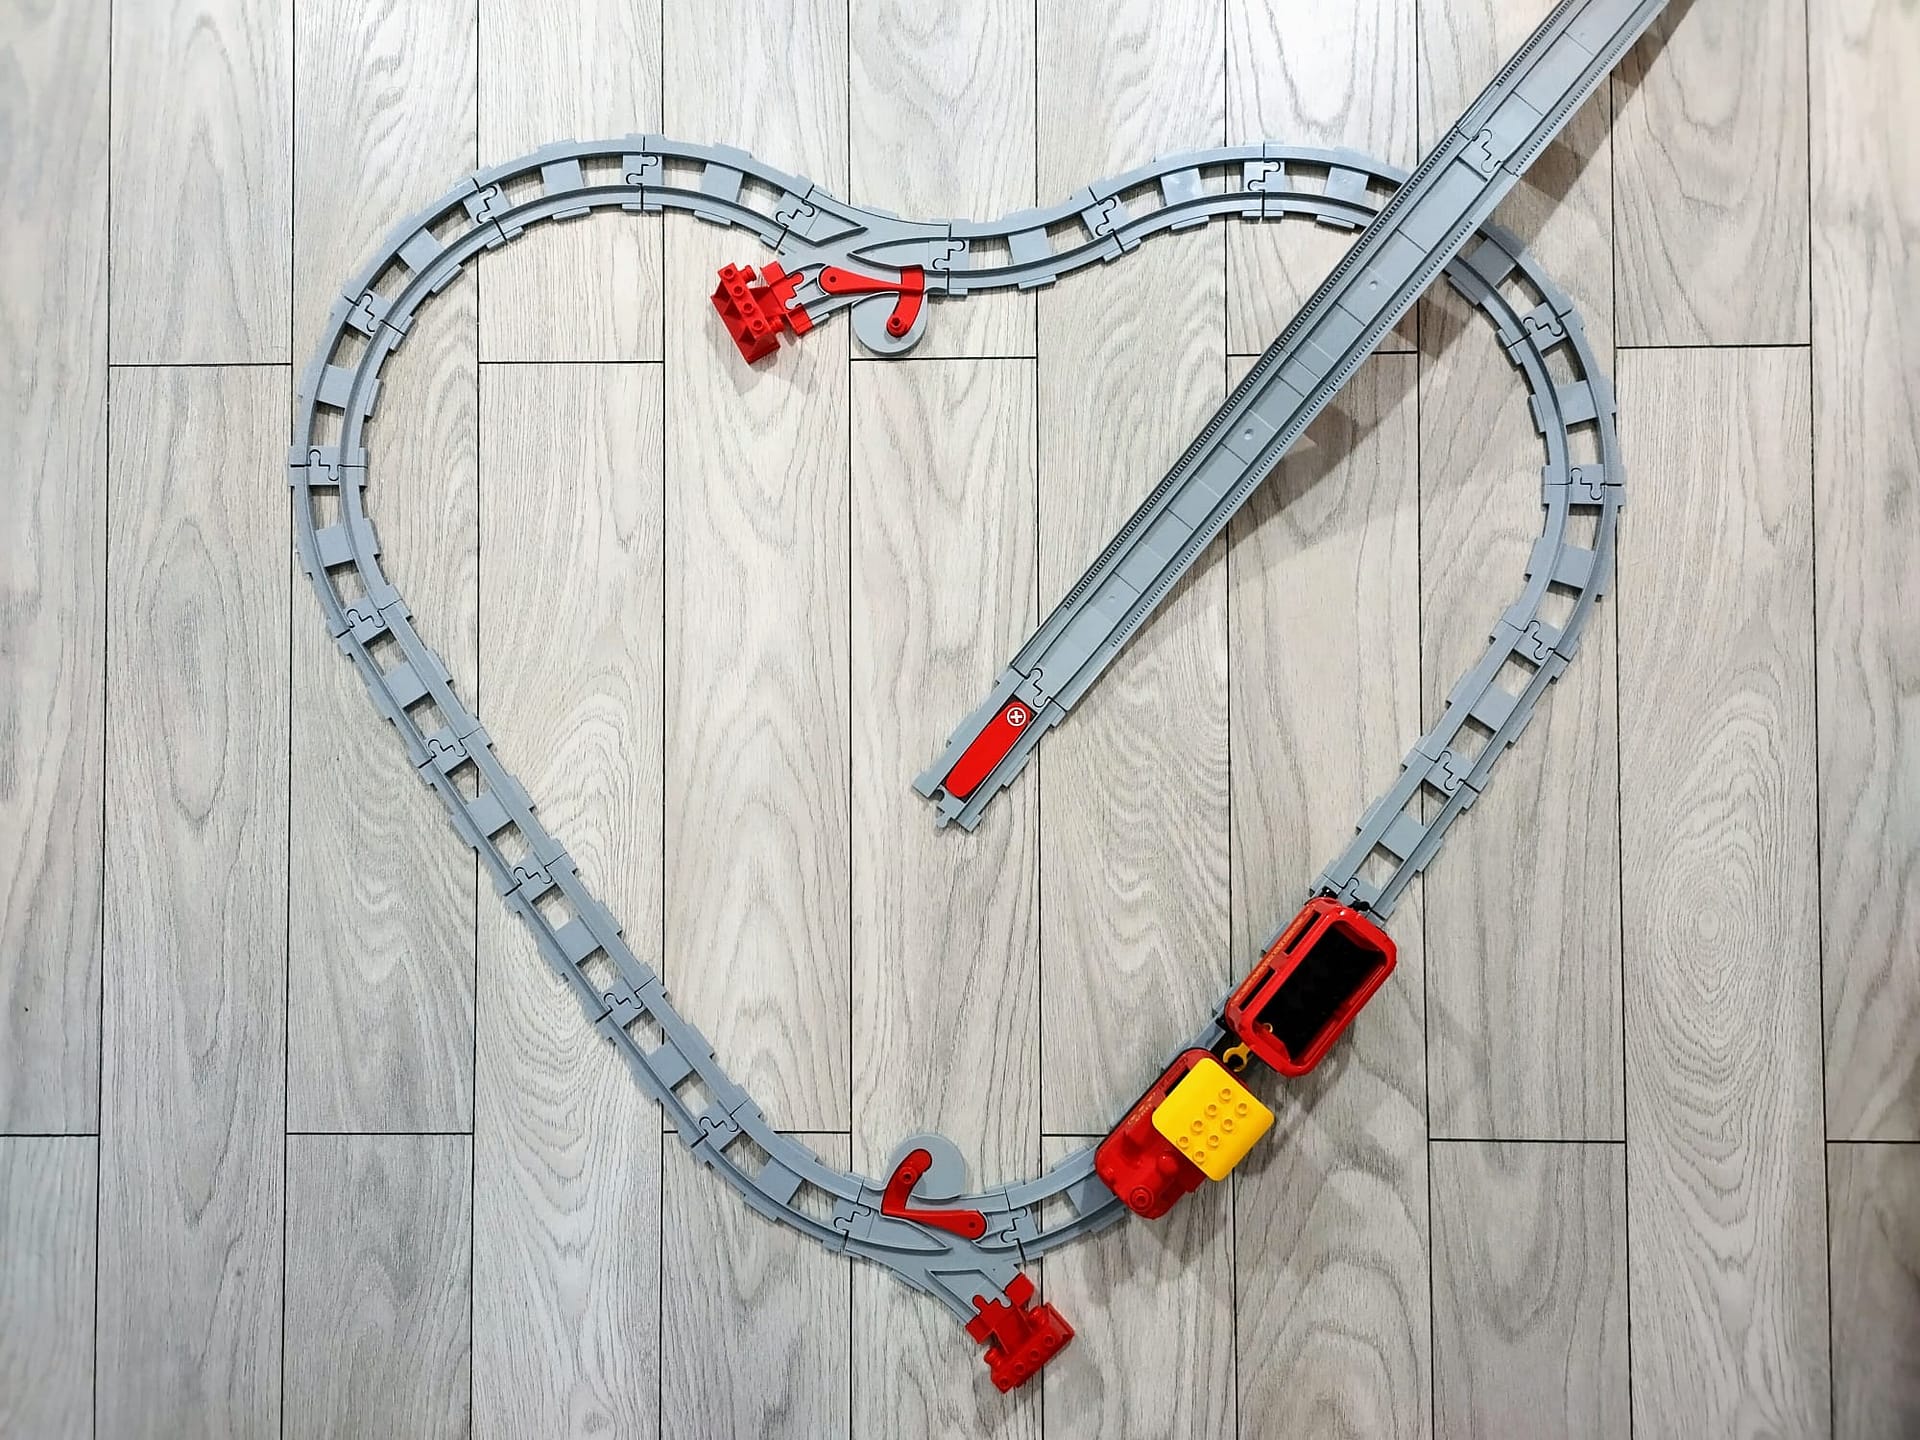 Let There Be Love – Creatia 9: dupLOVE train tracks